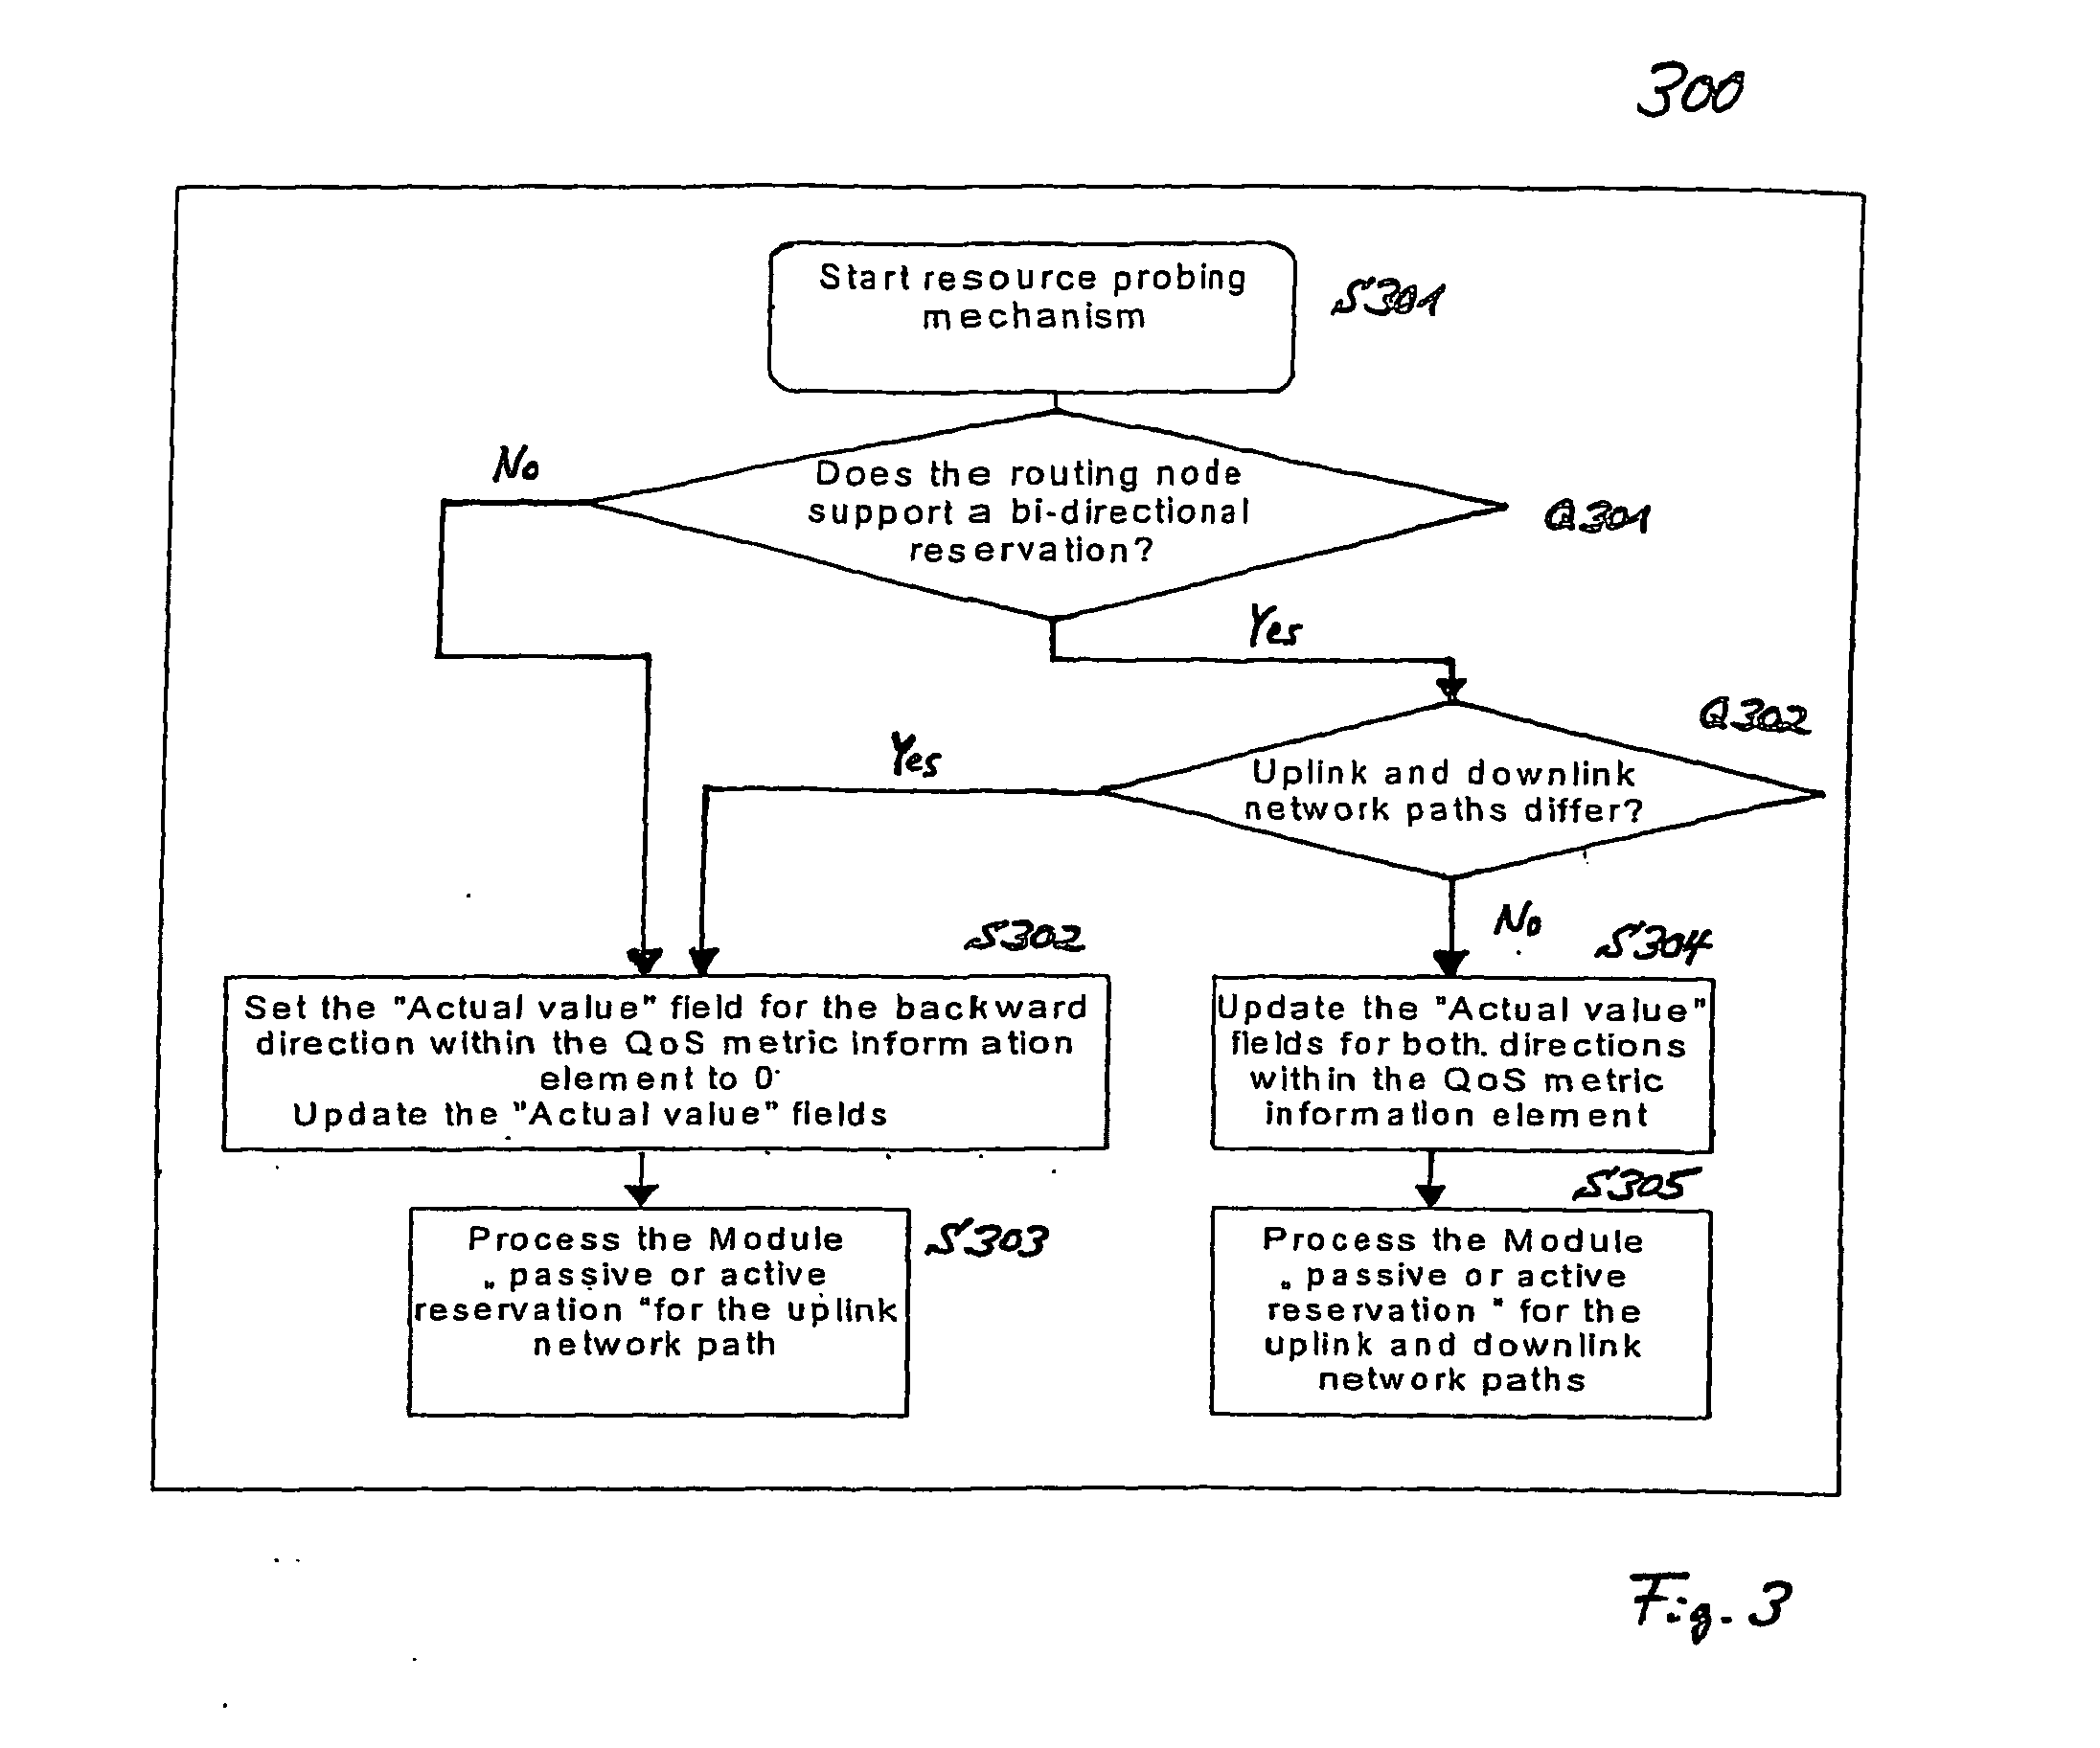 Bidirectional Qos Reservation Within an in-Band Signaling Mechanism